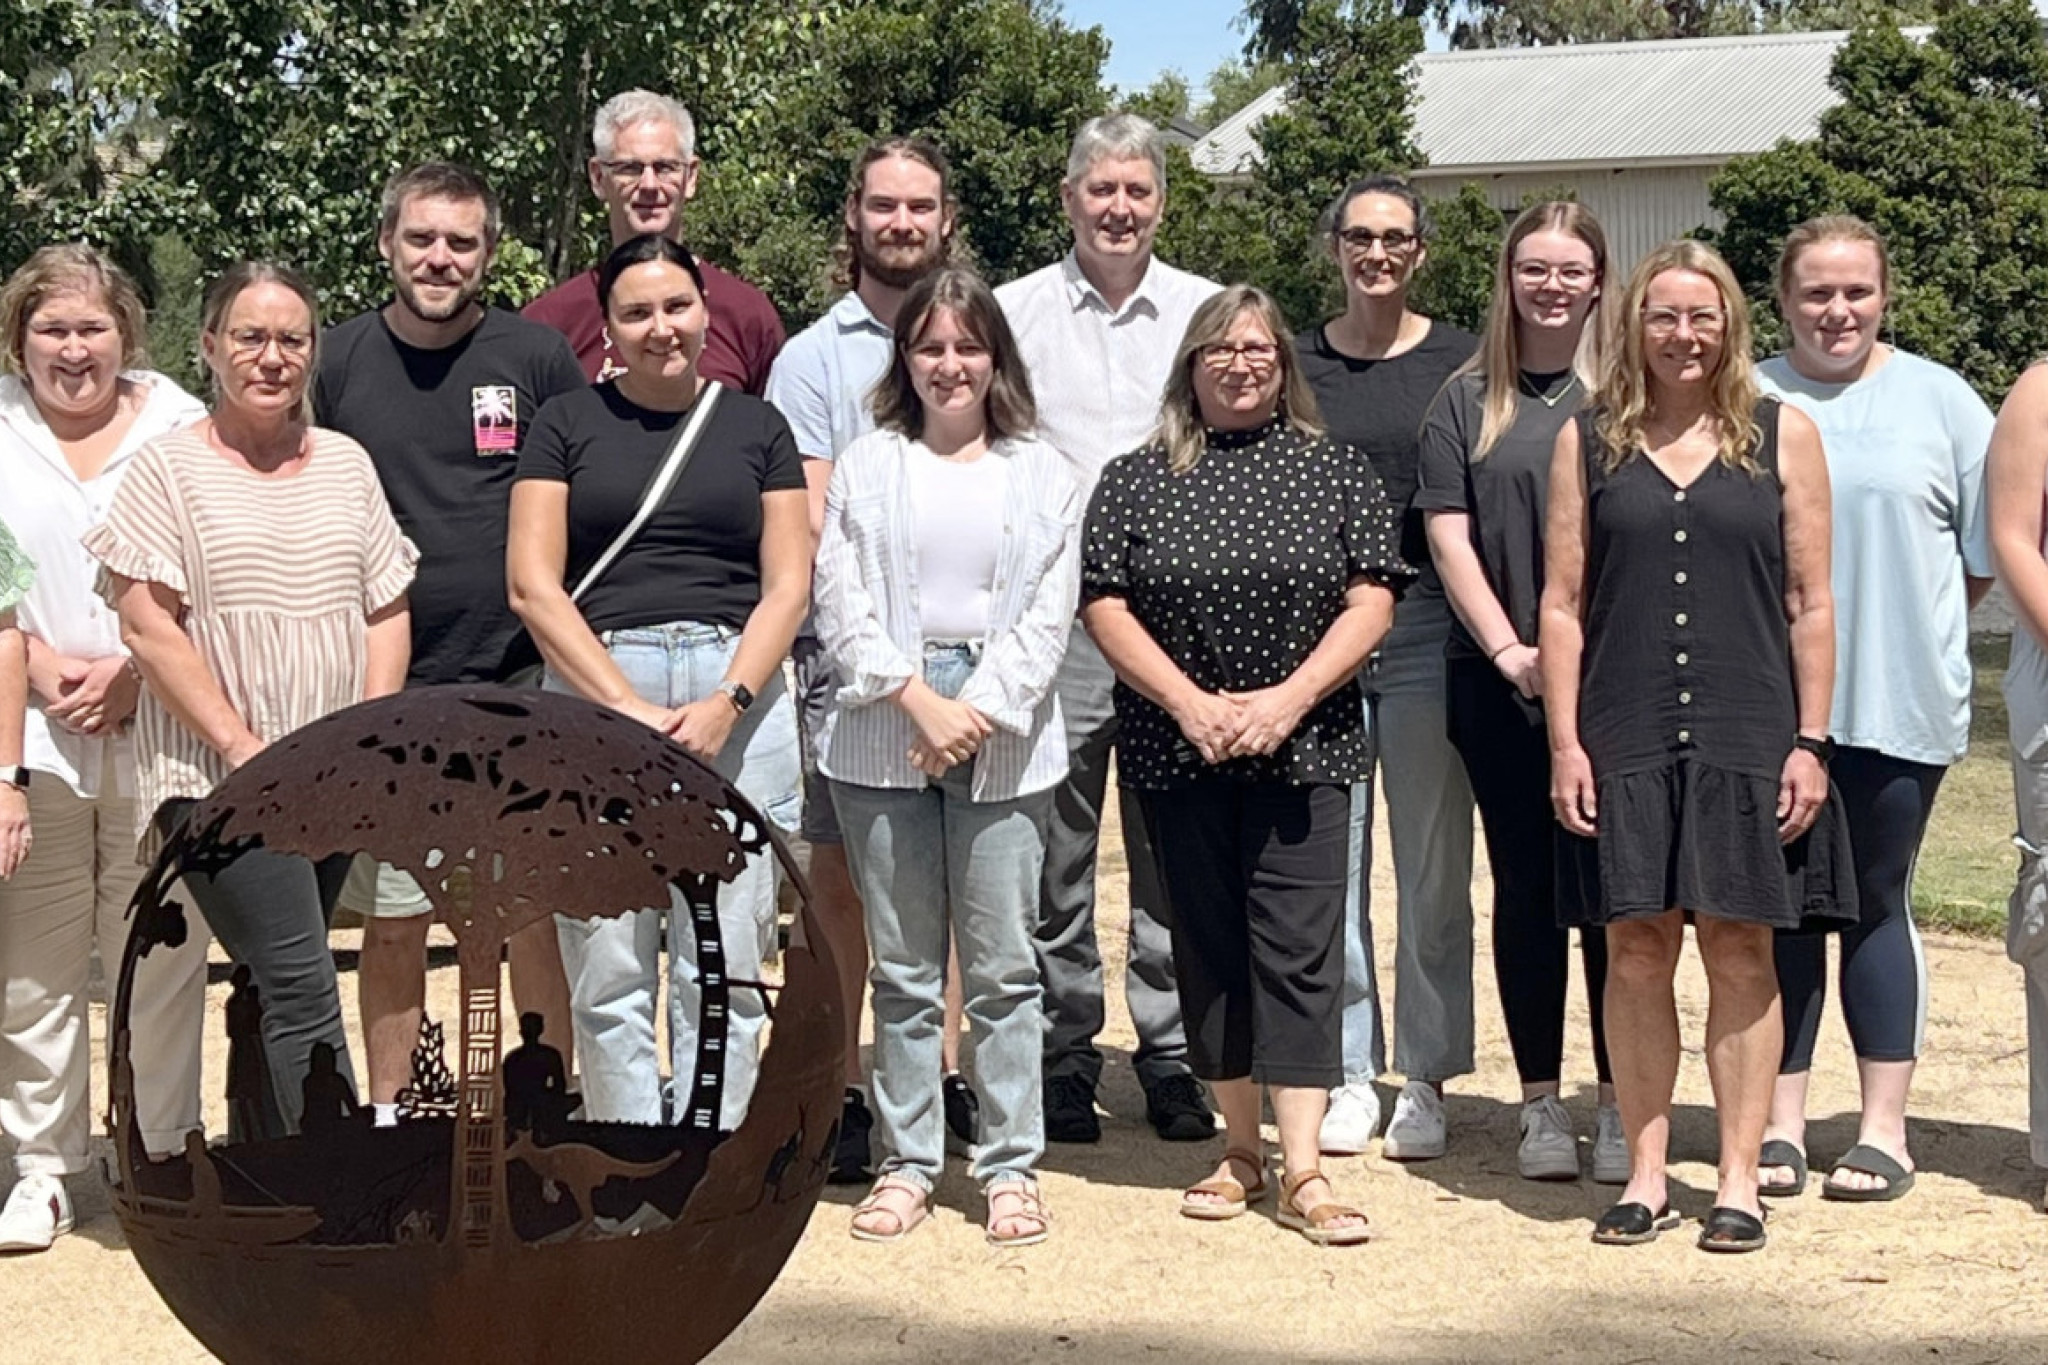 Federation University Wimmera campus Bachelor of Education Studies students, with teacher Dr Peter Sellings